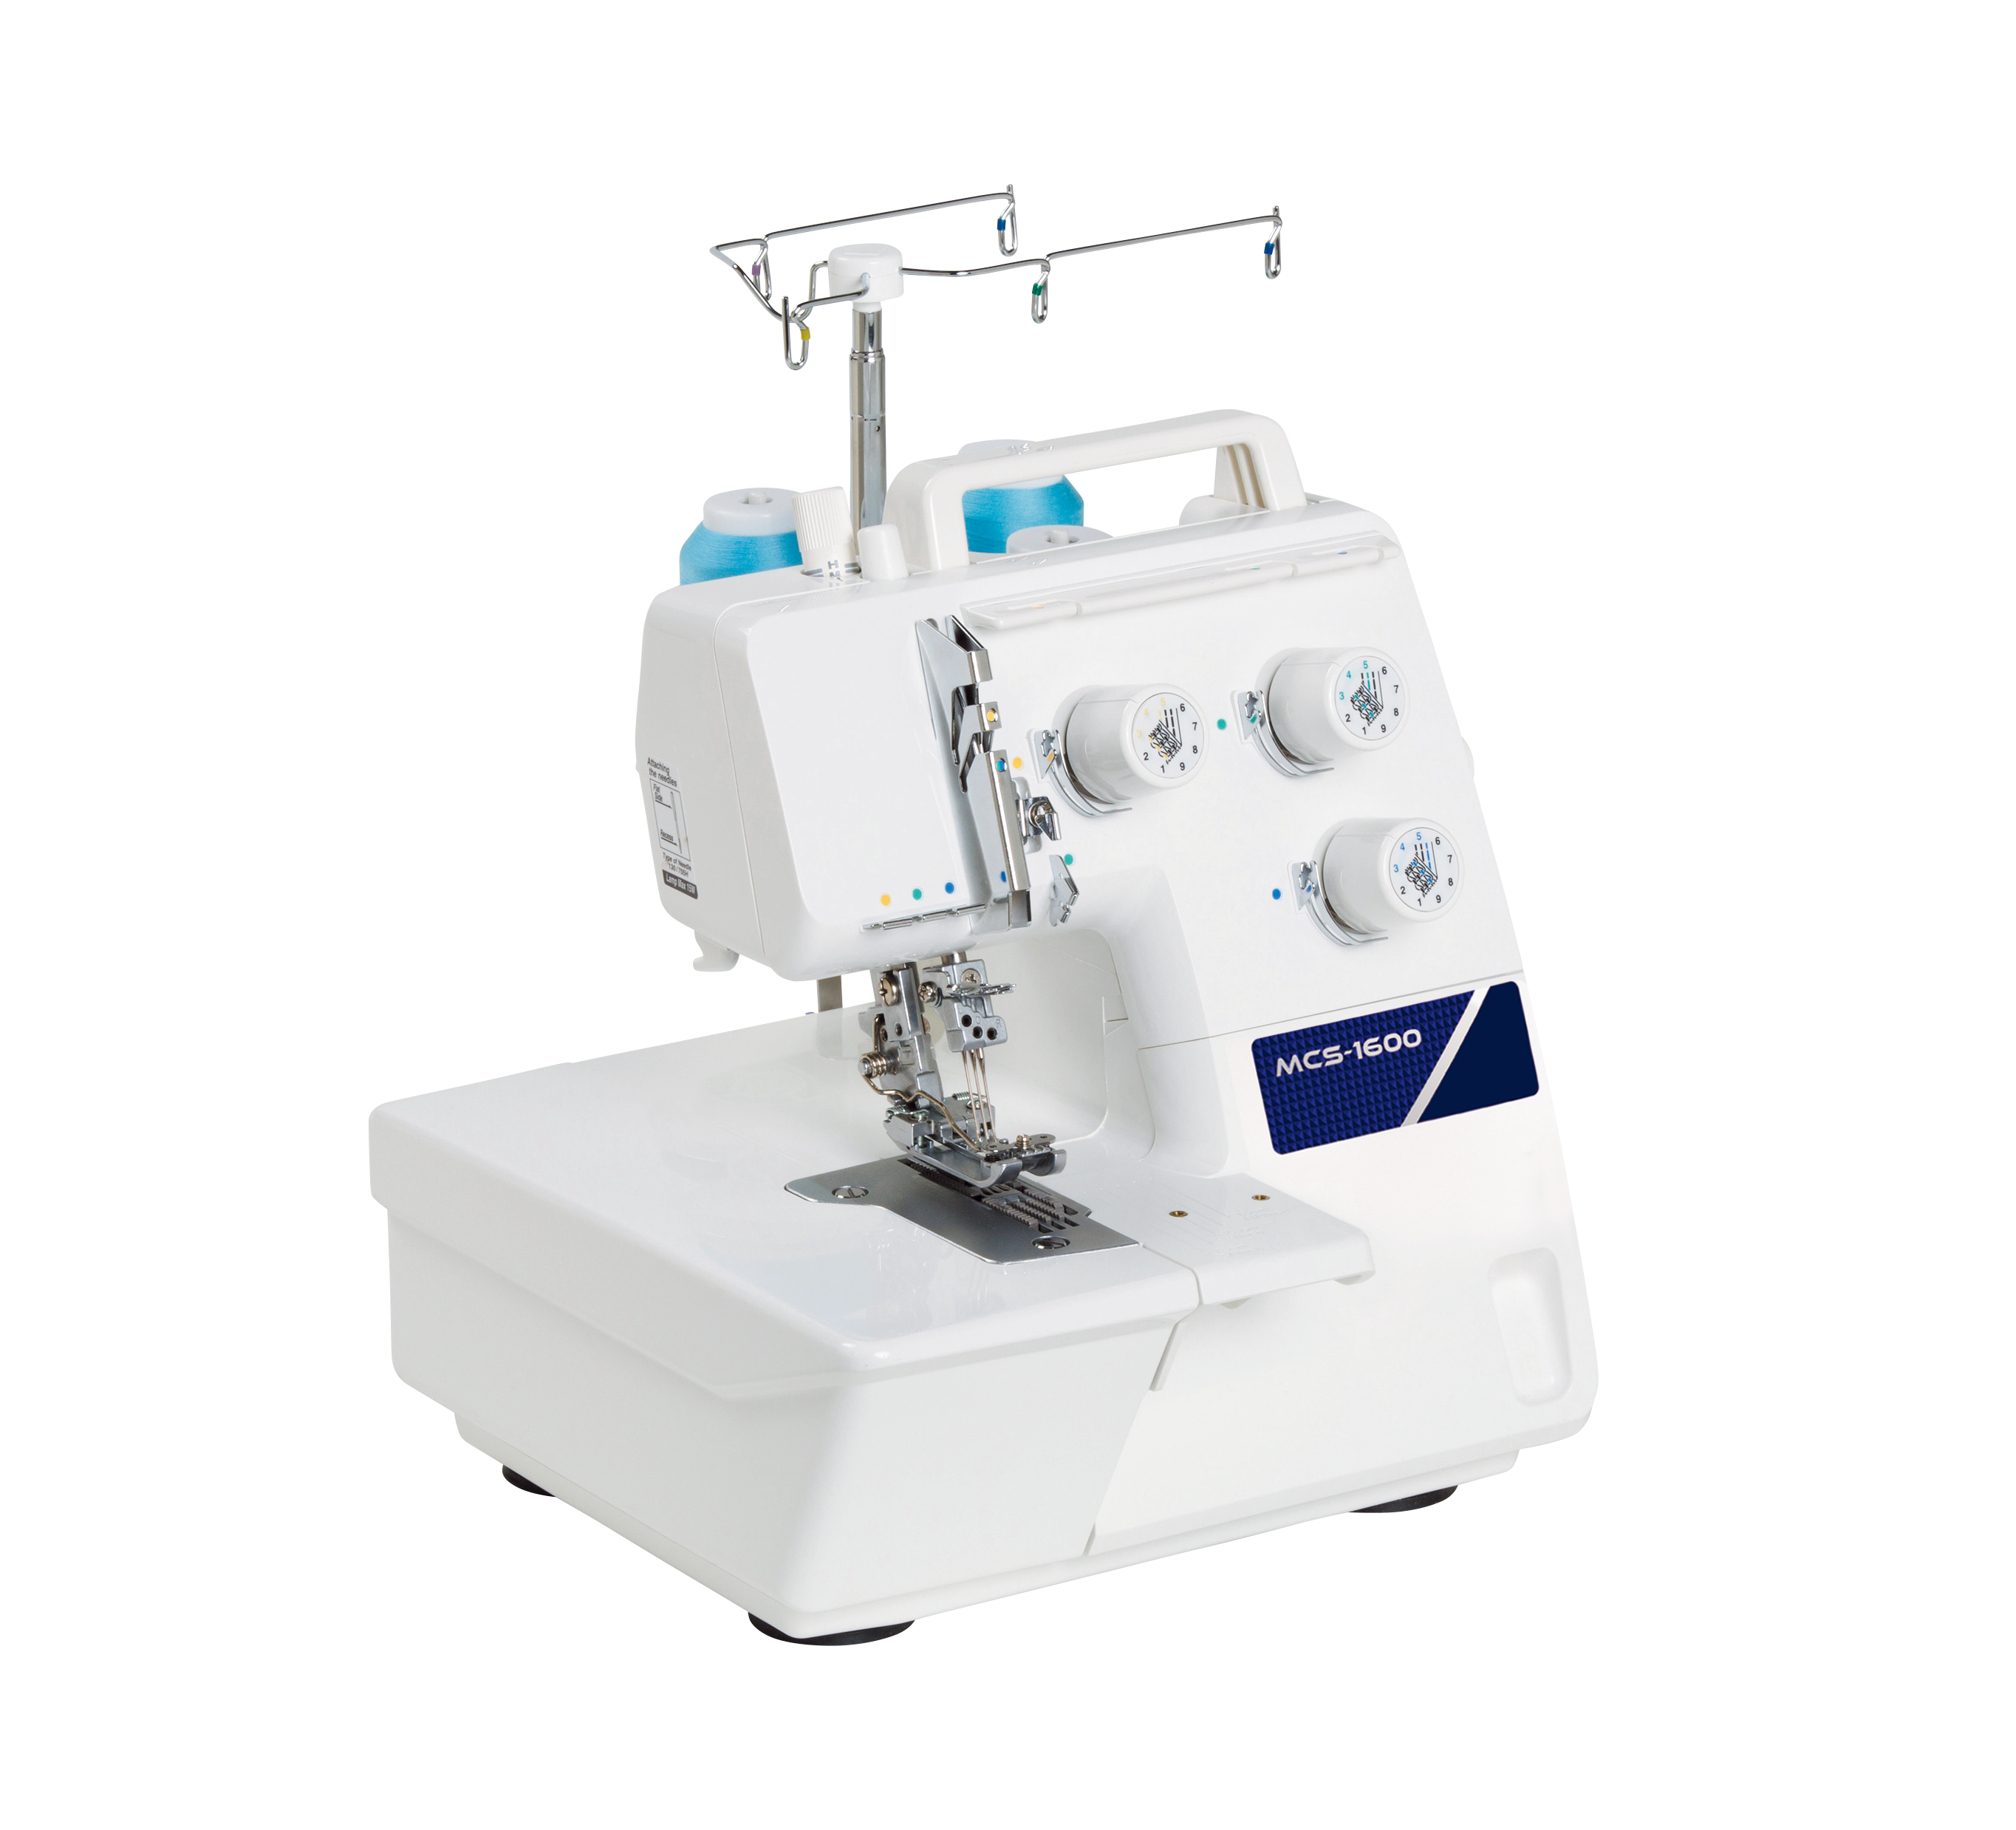 Juki MCS-1600 CoverStitch Sewing Machine with Extension Table for Sale at World Weidner